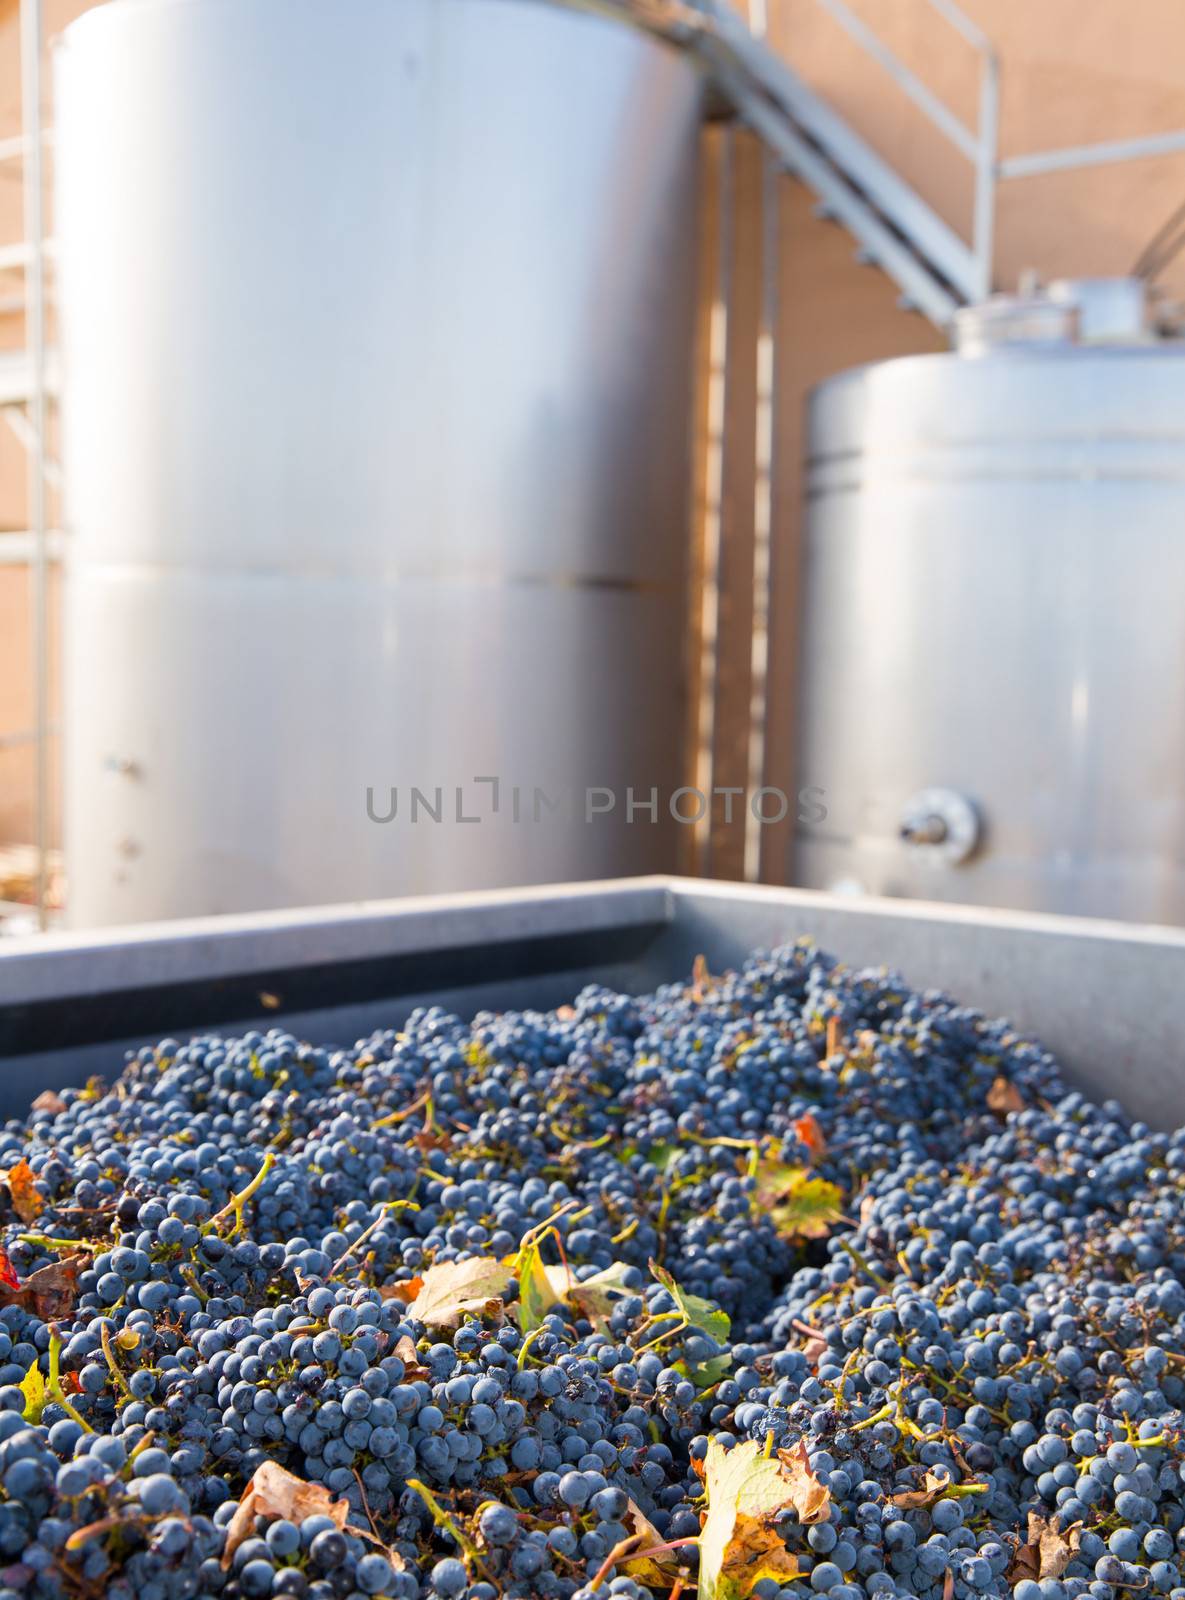 cabernet sauvignon vinemaking with grapes and Fermentation stainless steel tanks vessels